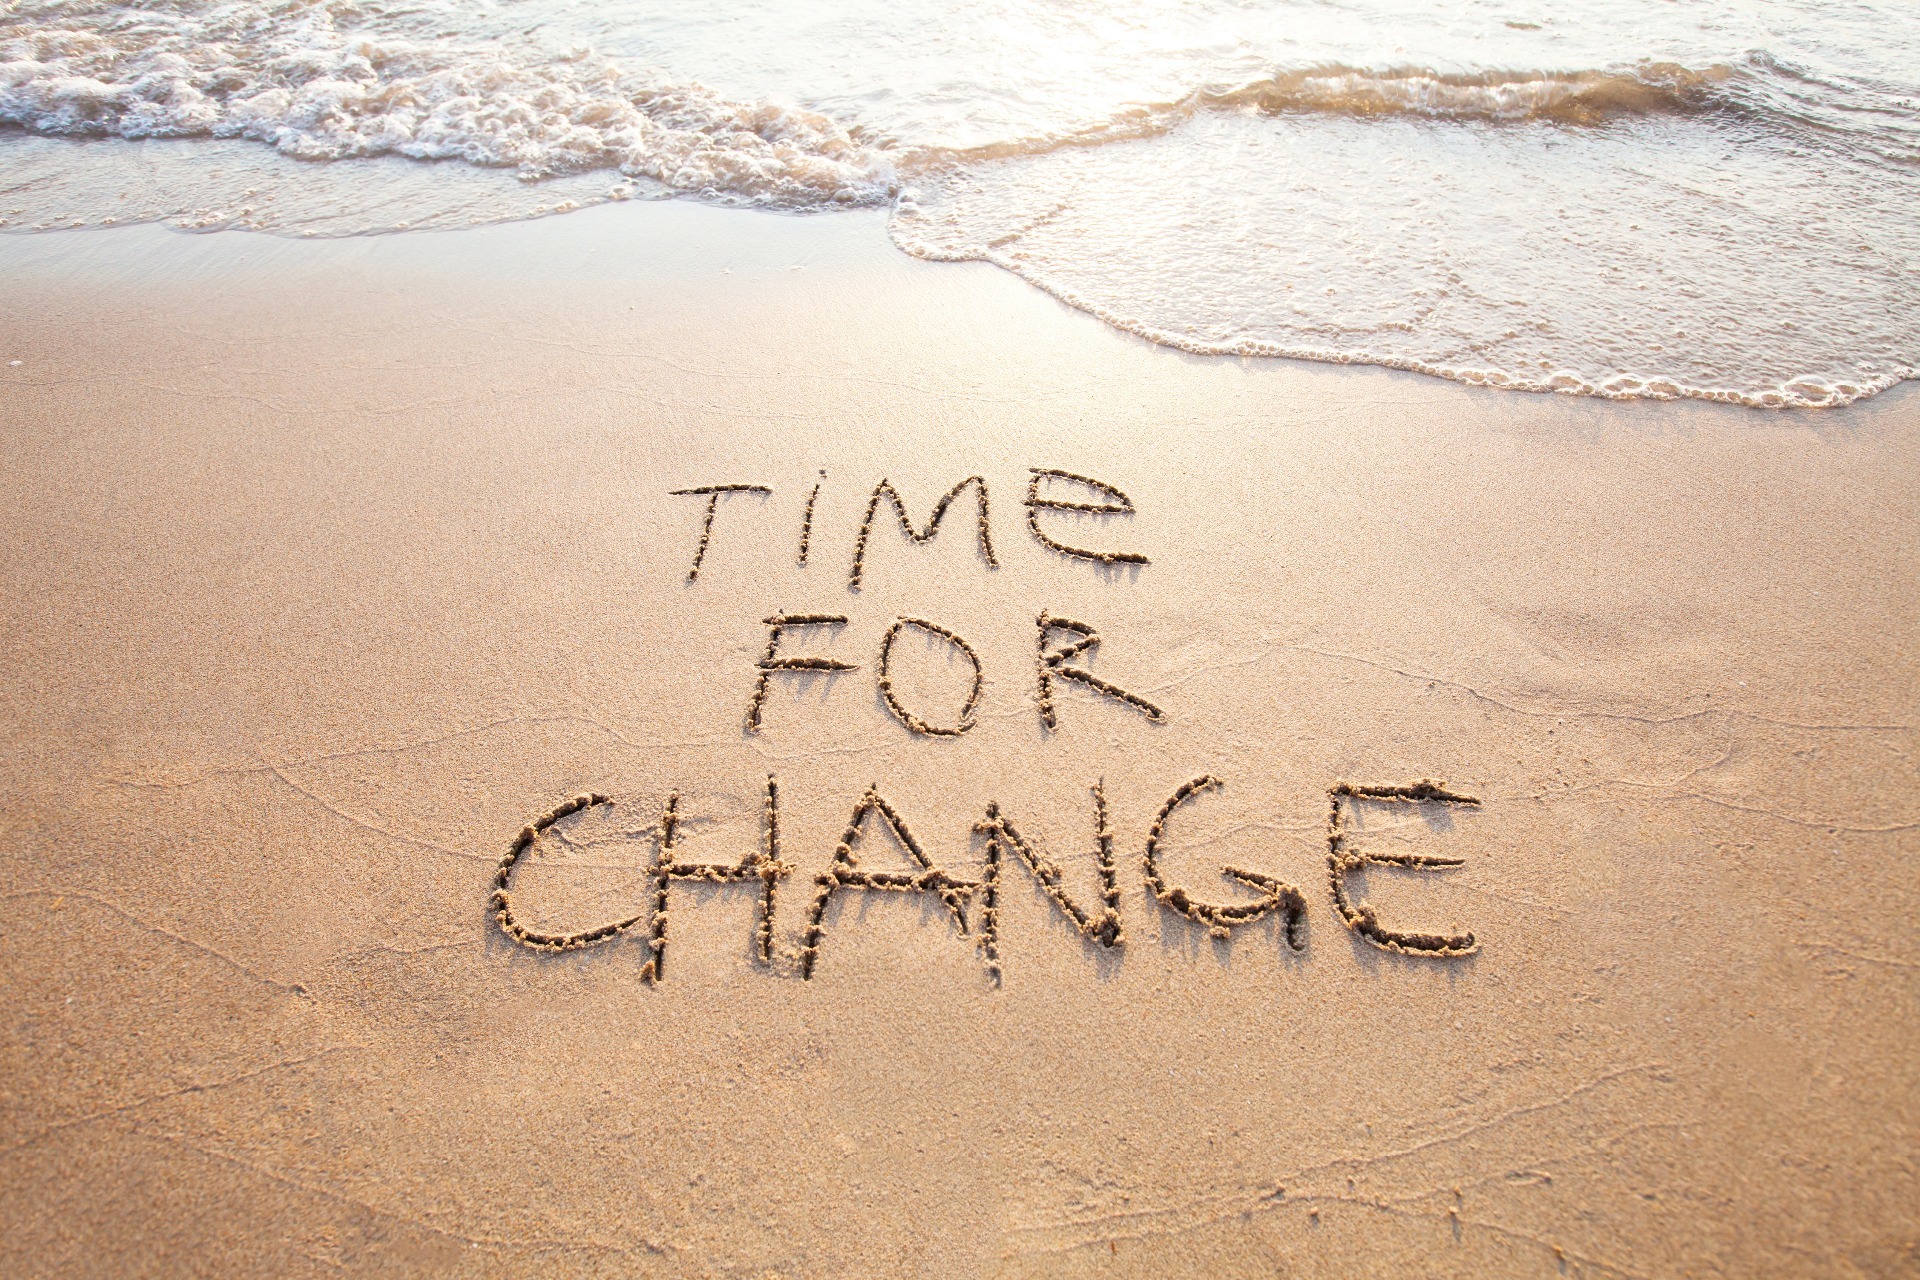 'Time for Change' written into the sand, with the sea drifting in and out 